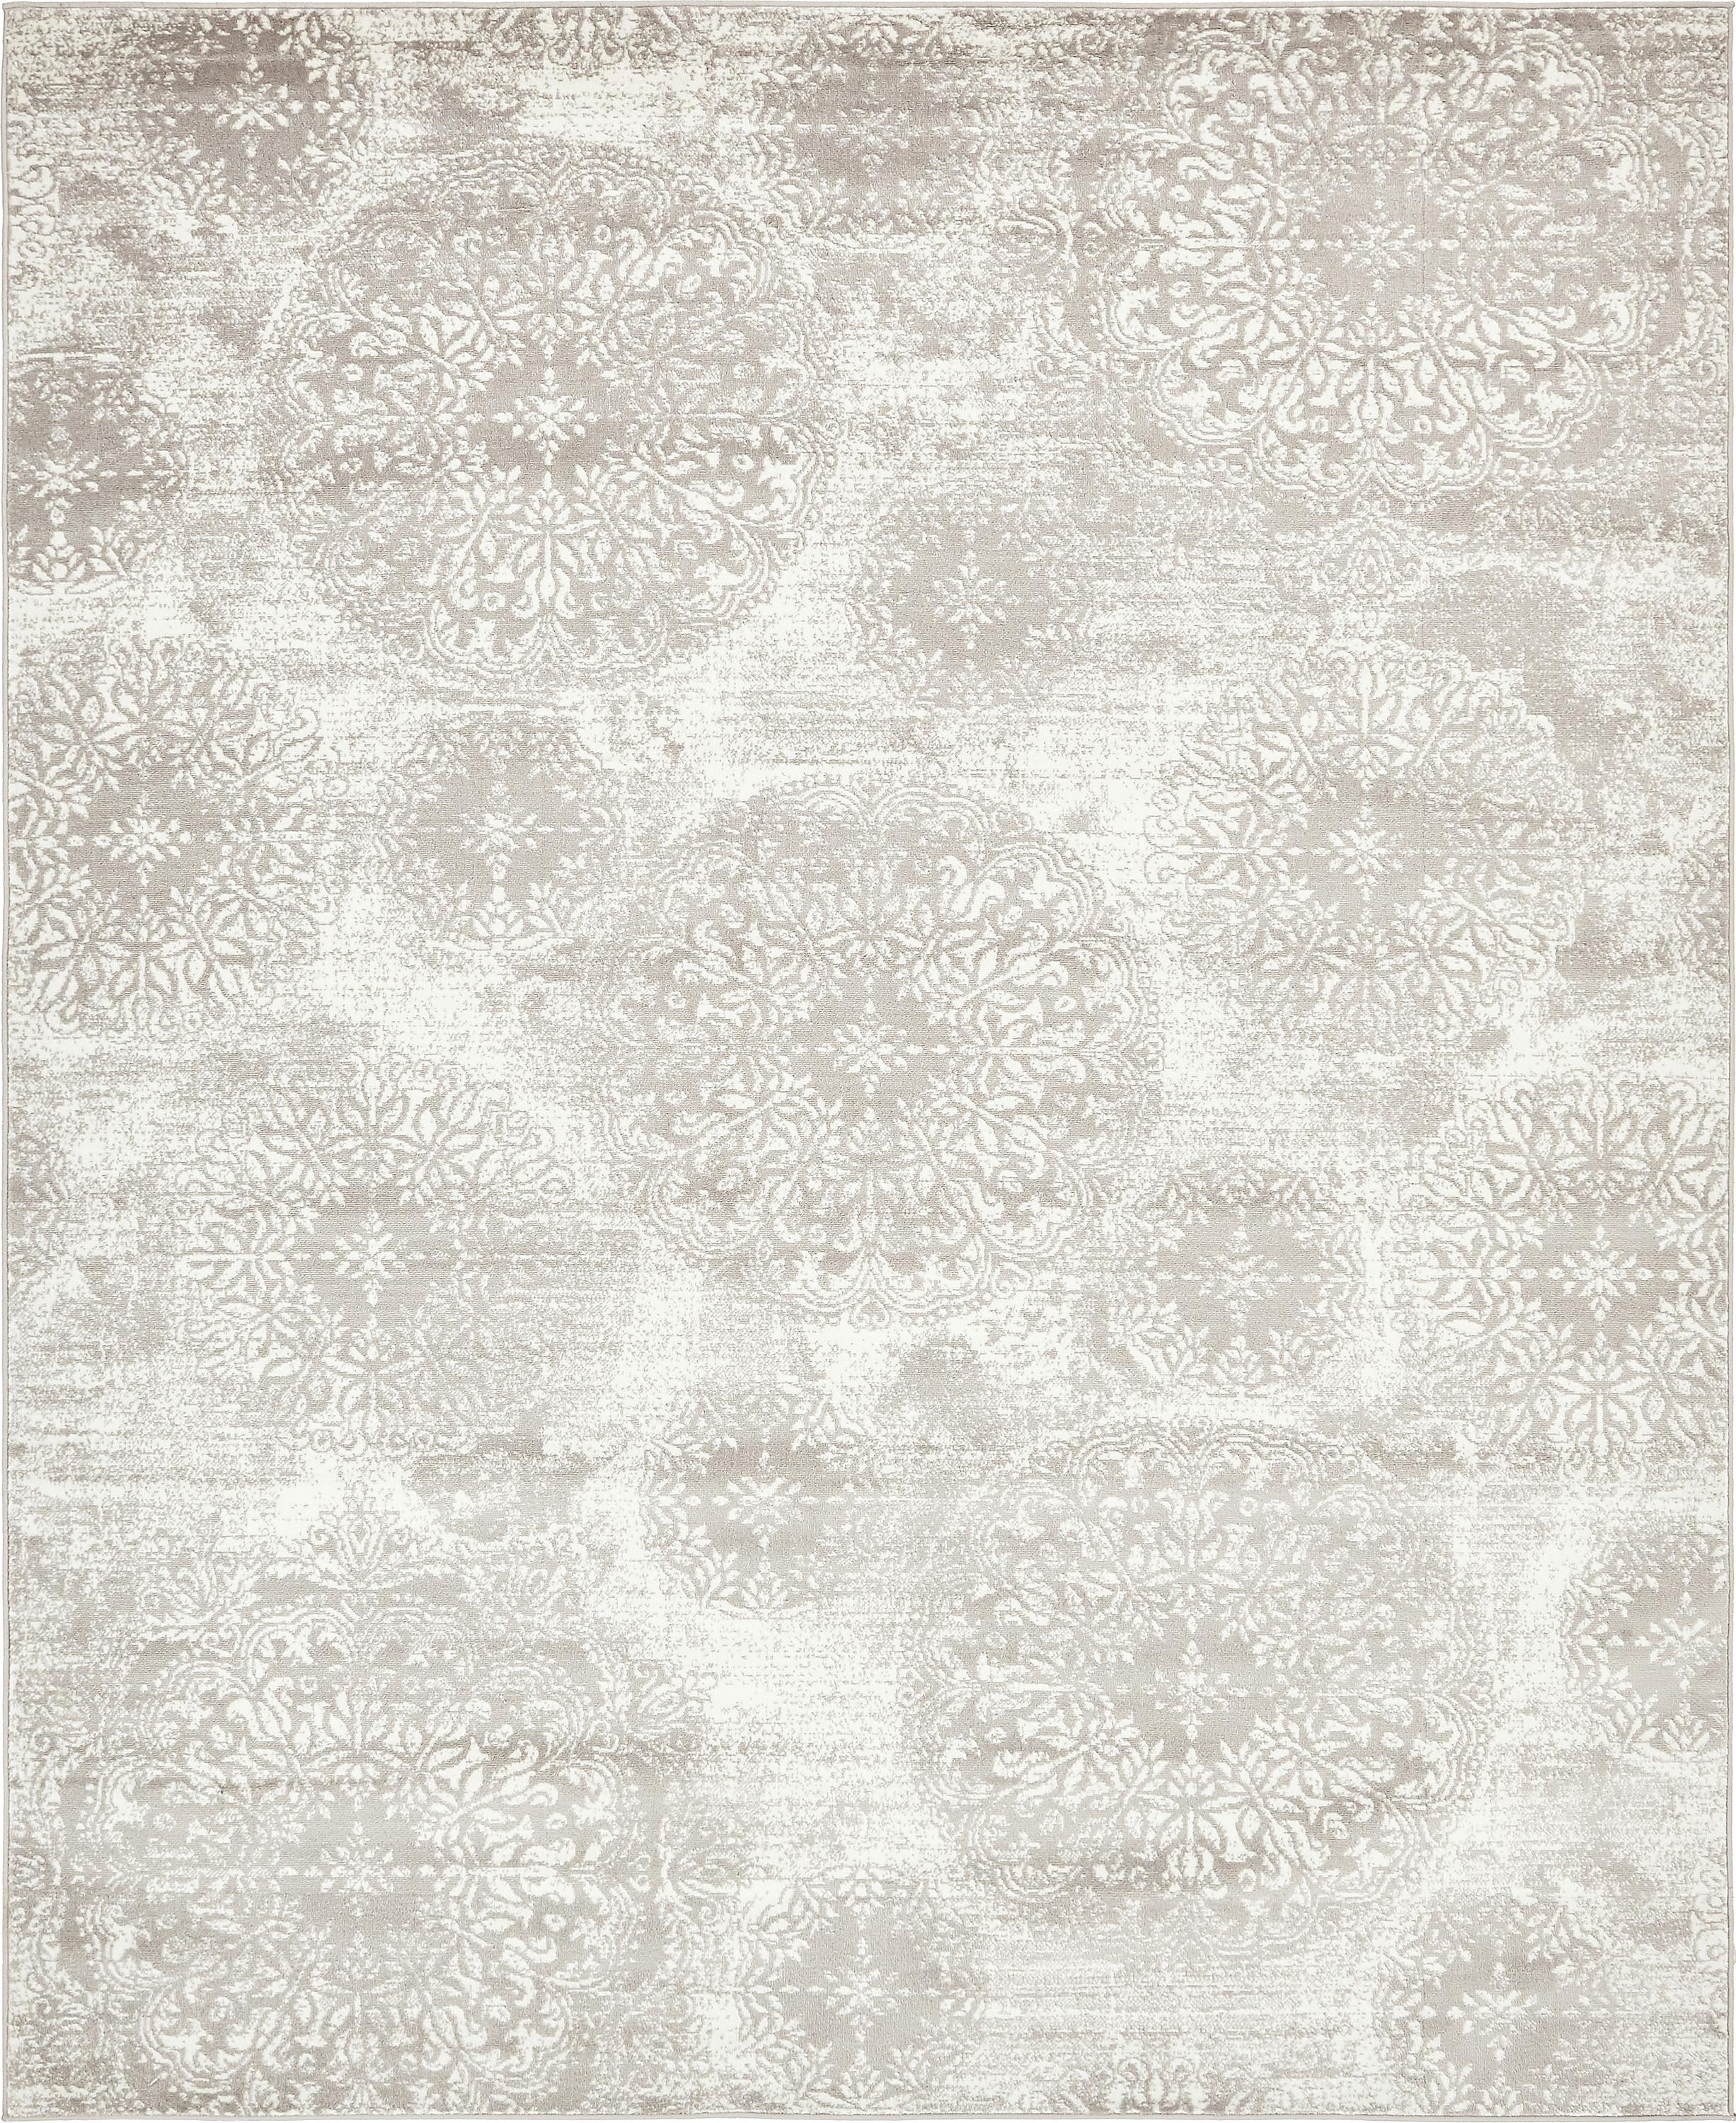 2' 0 x 13' 0 Runner Unique Loom Sofia Collection Area Traditional Vintage Rug Gray/Ivory French Inspired Perfect for All Home Décor 